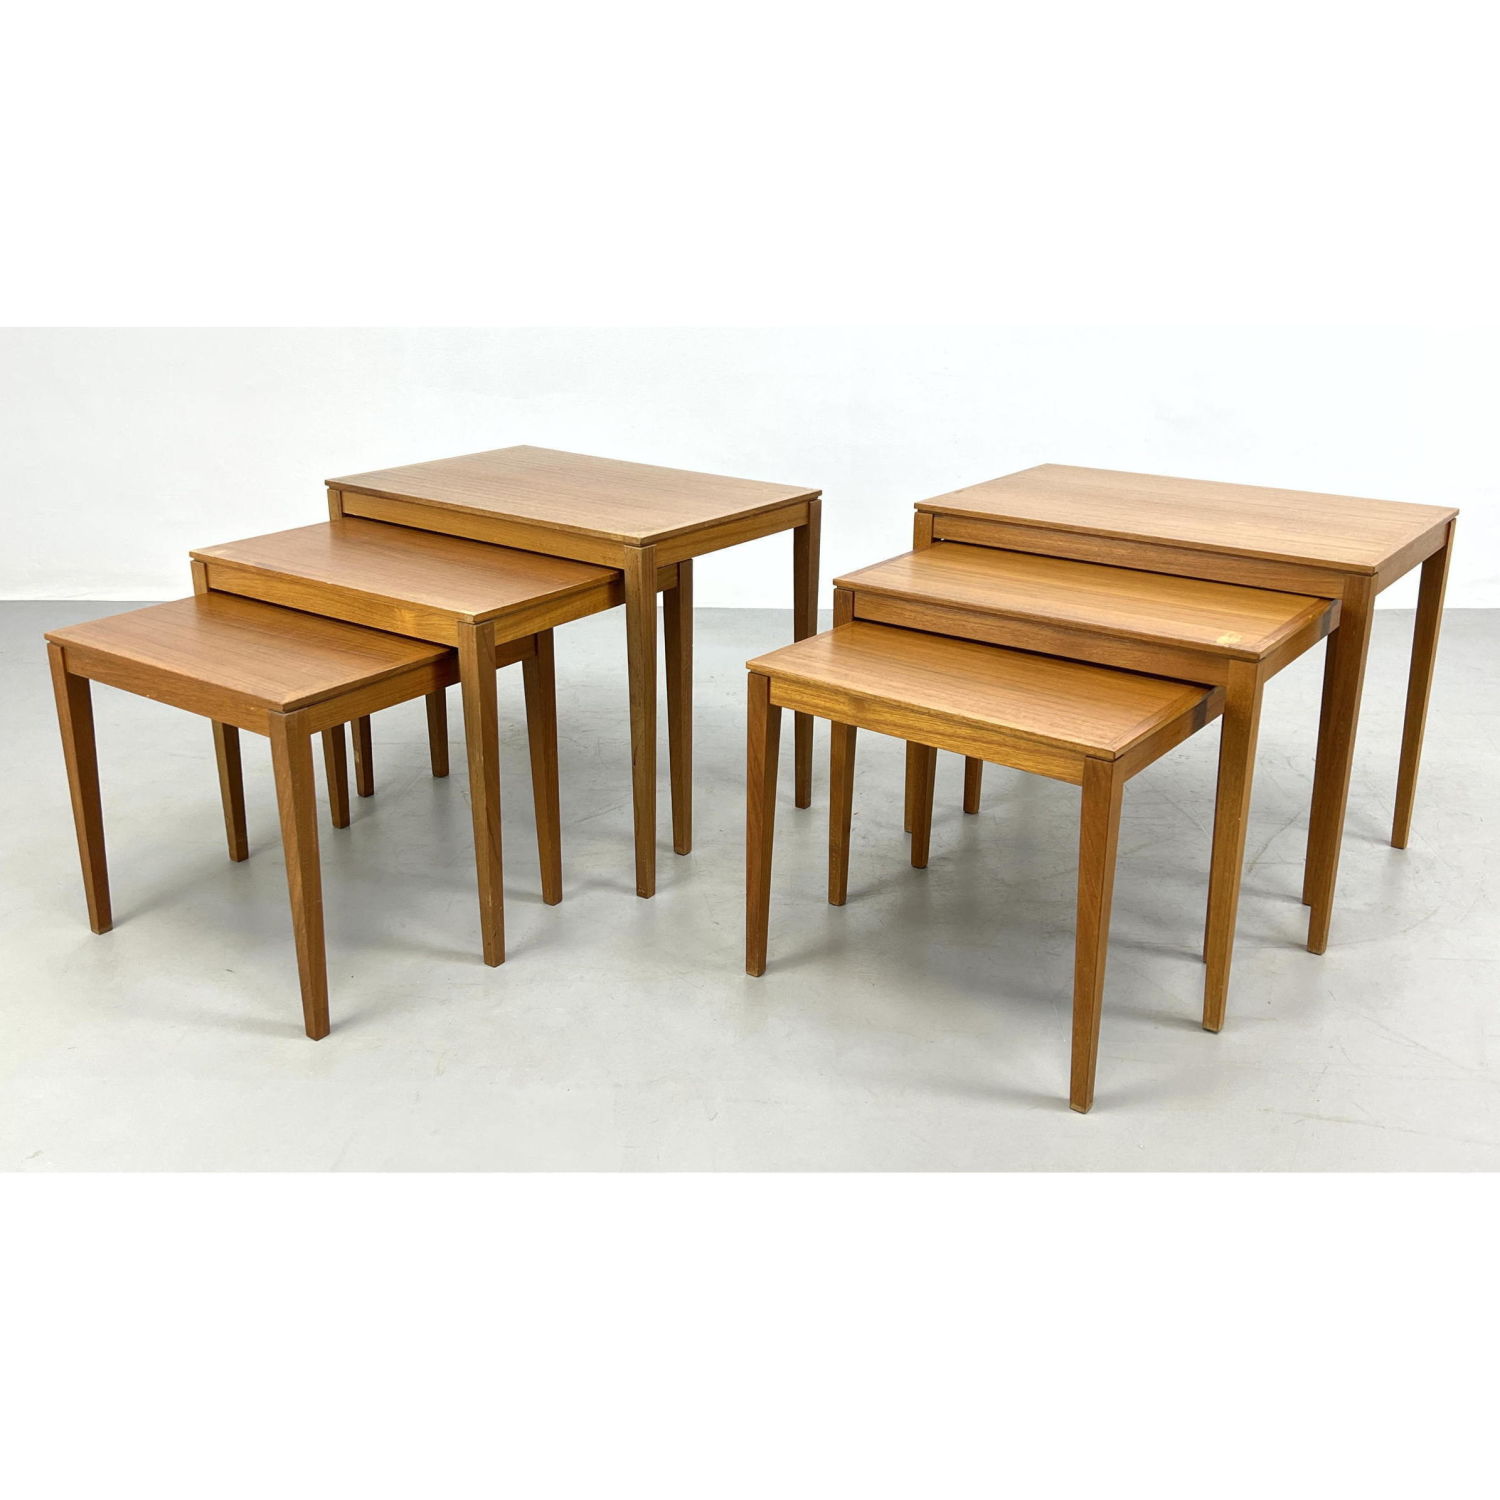 2 SETS Bent Silberg Nesting tables